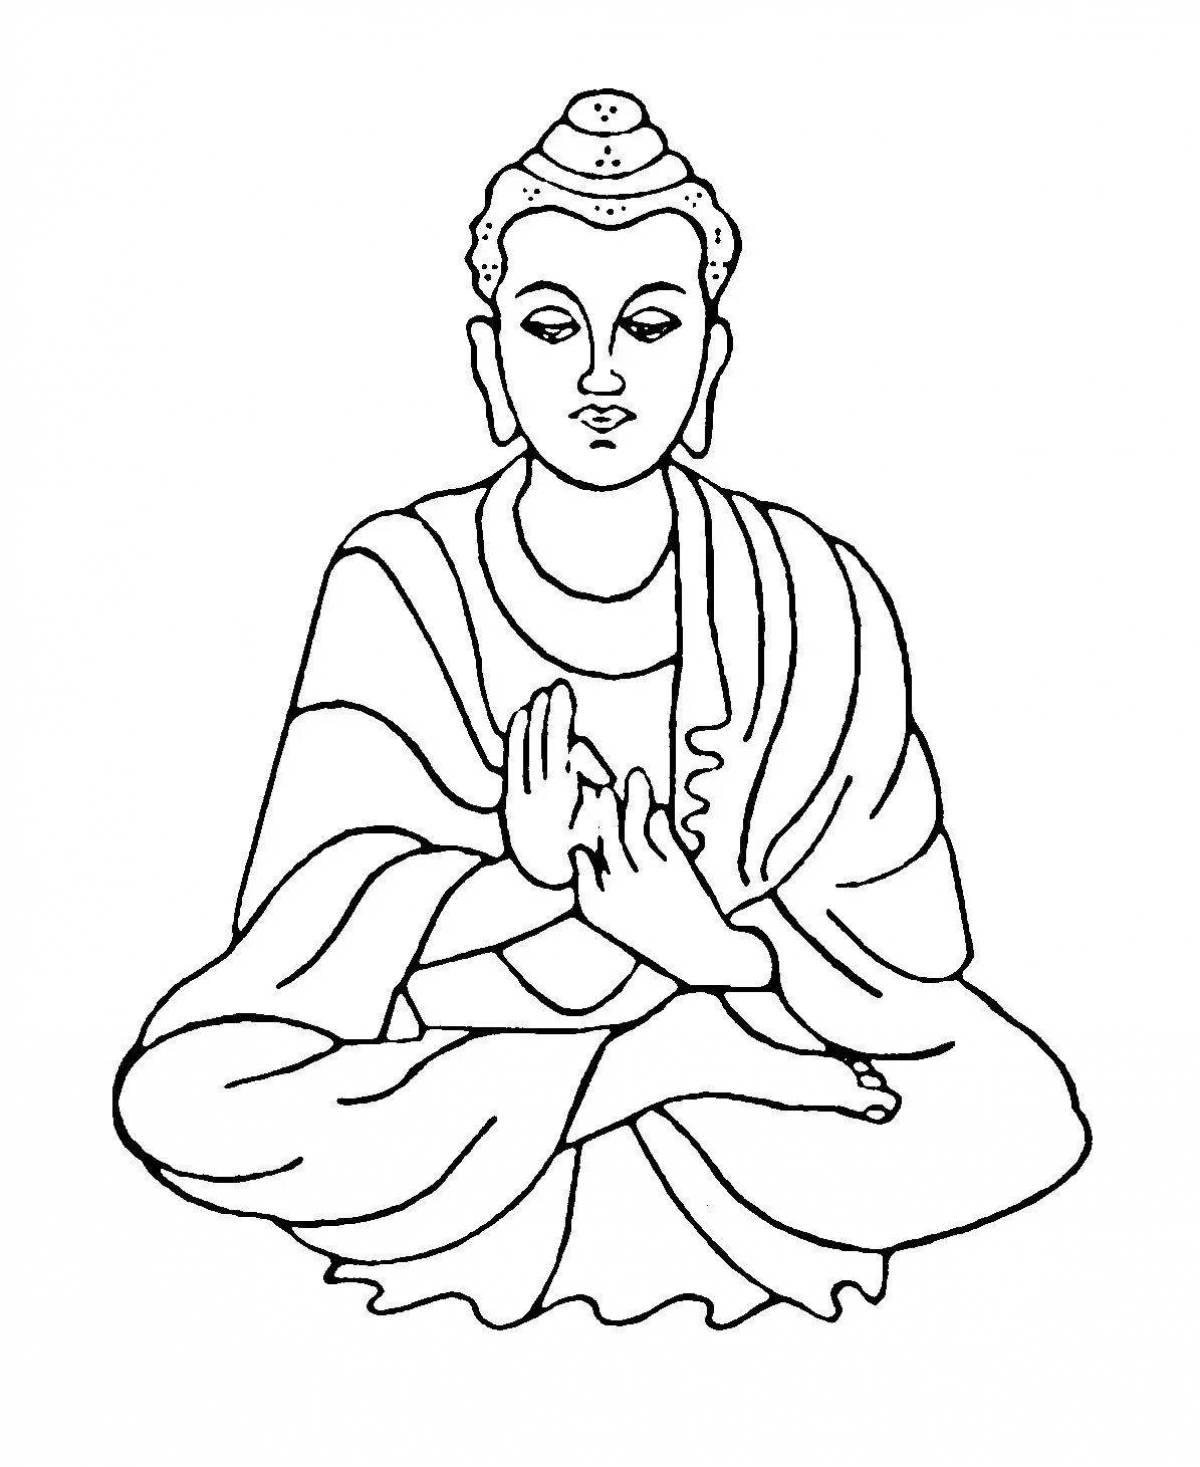 Coloring book blissful buddhism